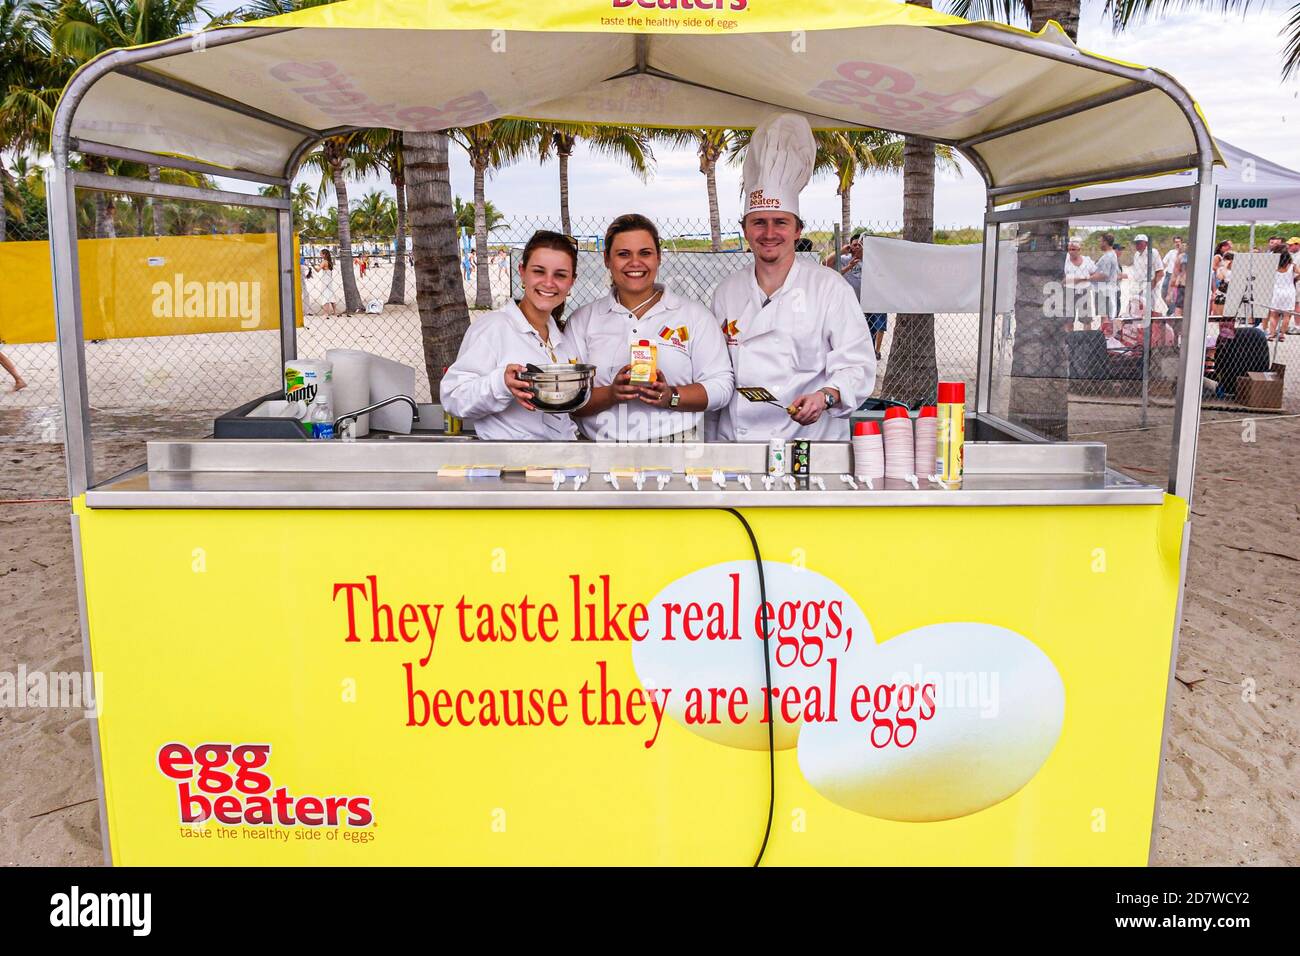 Miami Beach Florida,Ocean Drive,FabFest Taste of the Beach,food festival chef chefs cook cooks Egg Beaters,vendor stall booth, Stock Photo